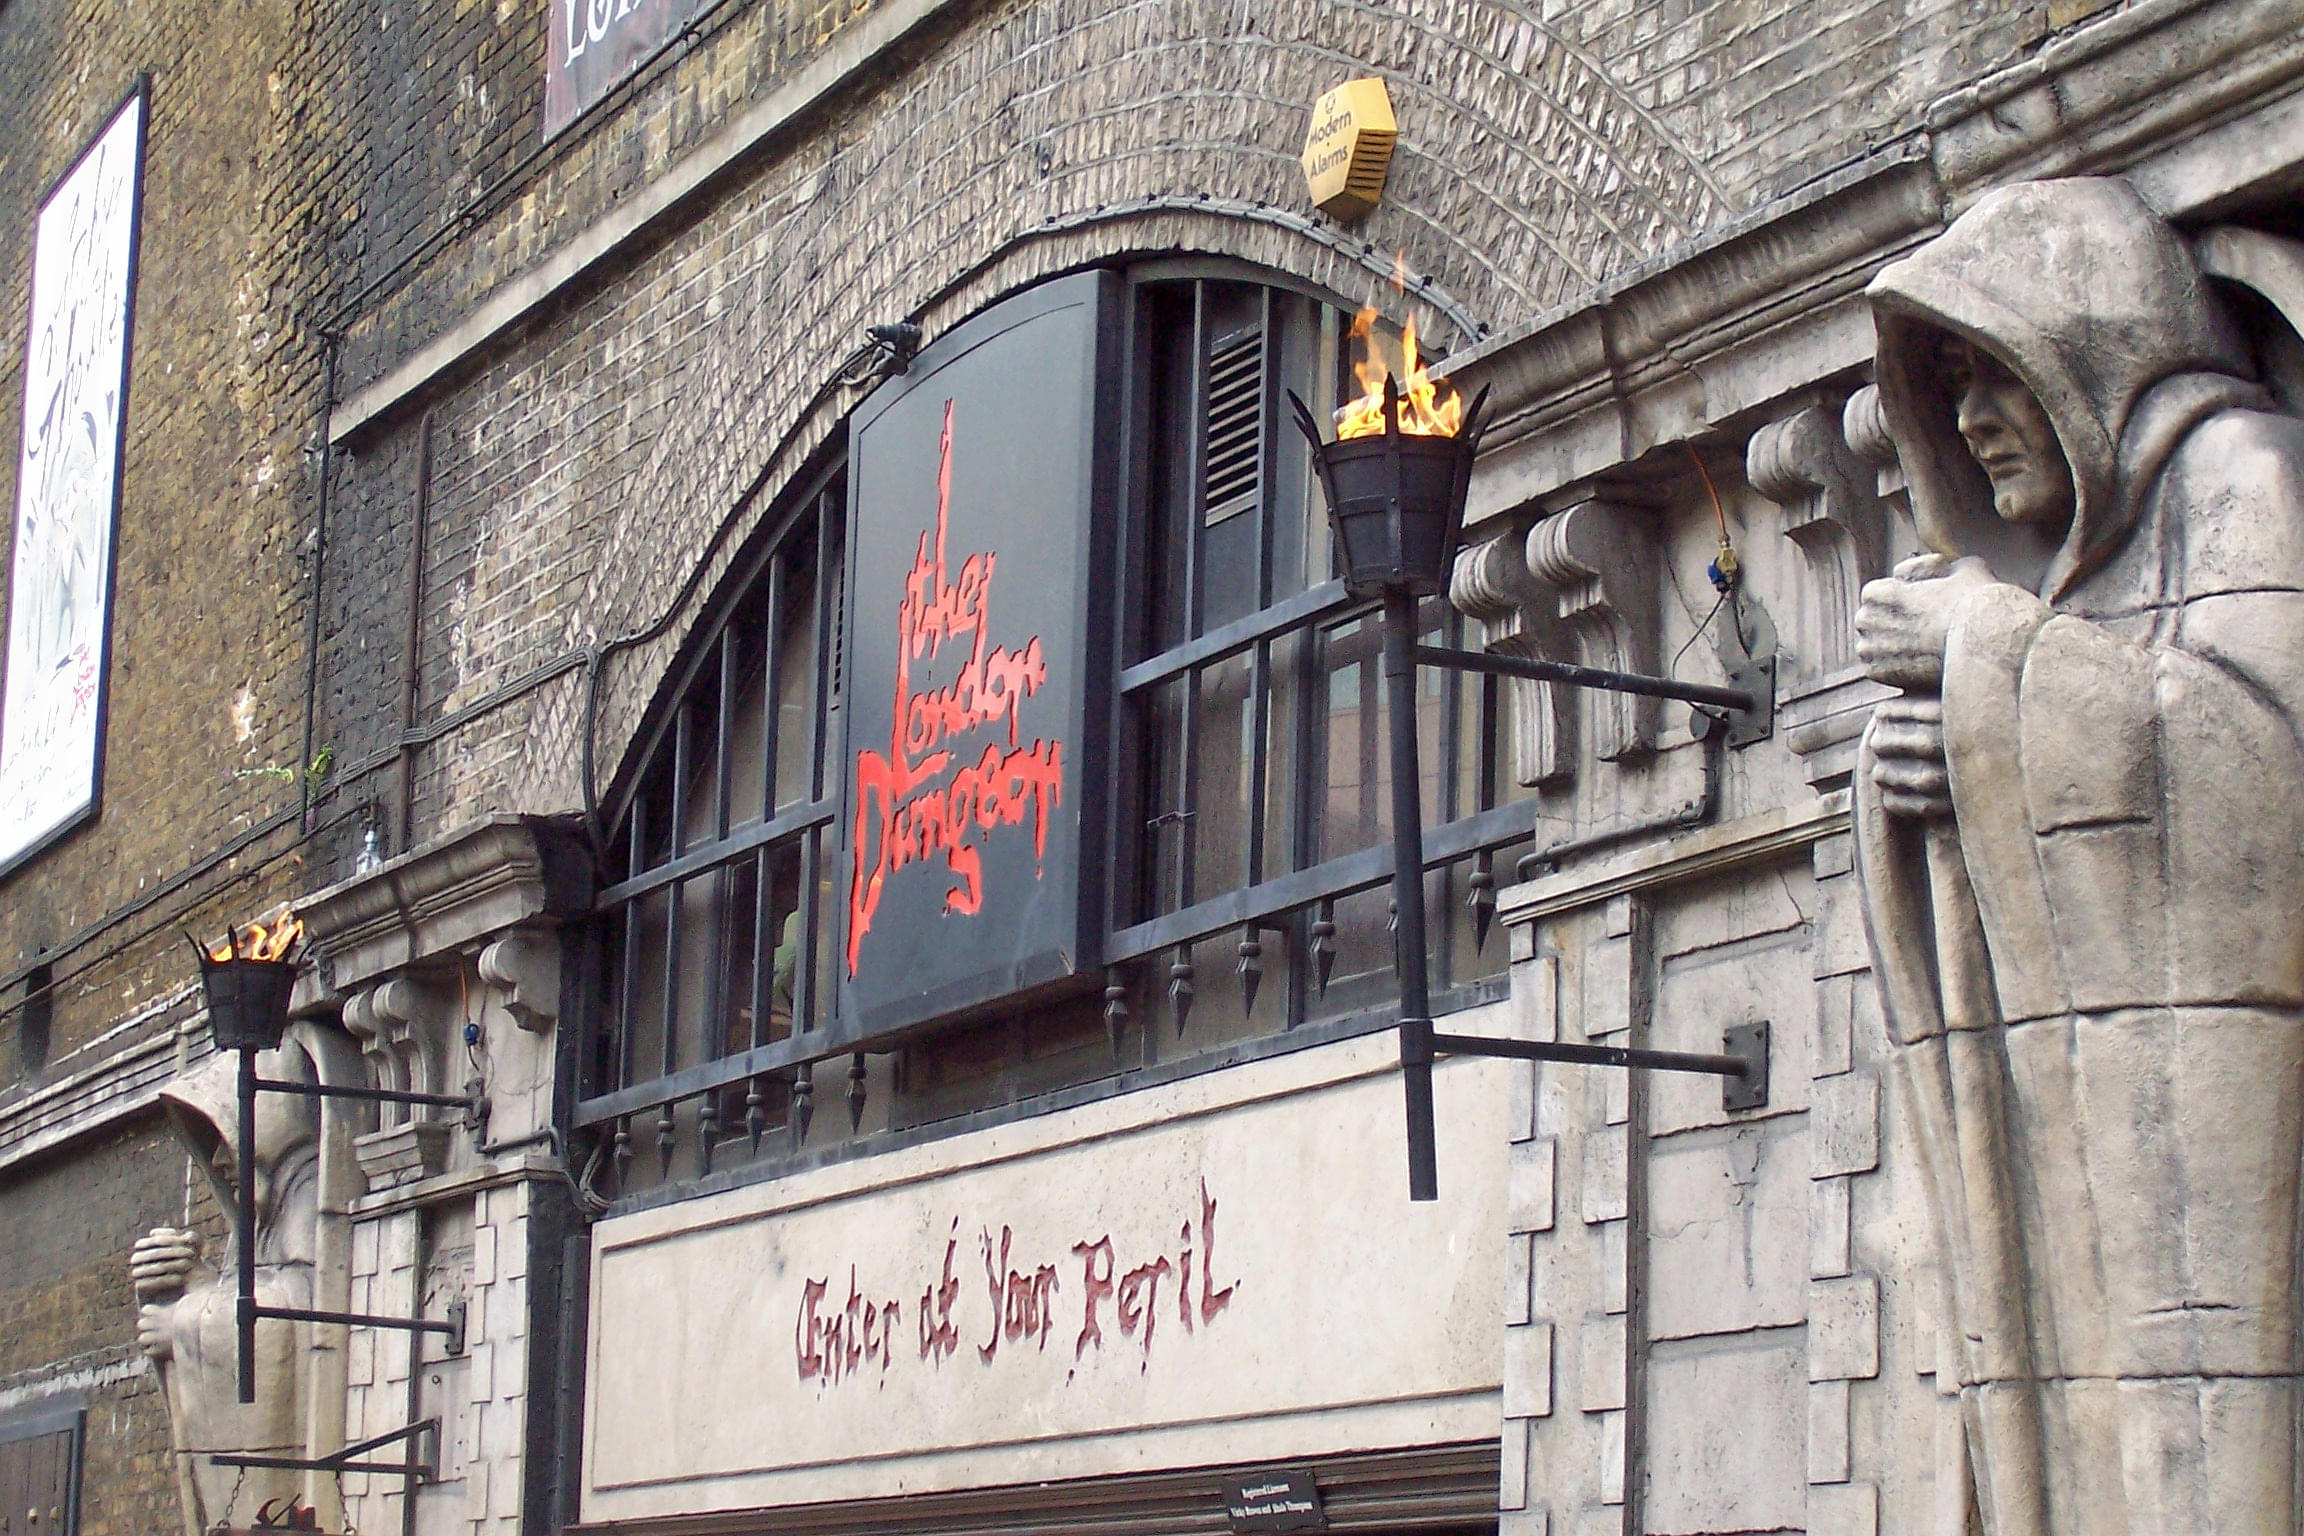 London Dungeon Overview